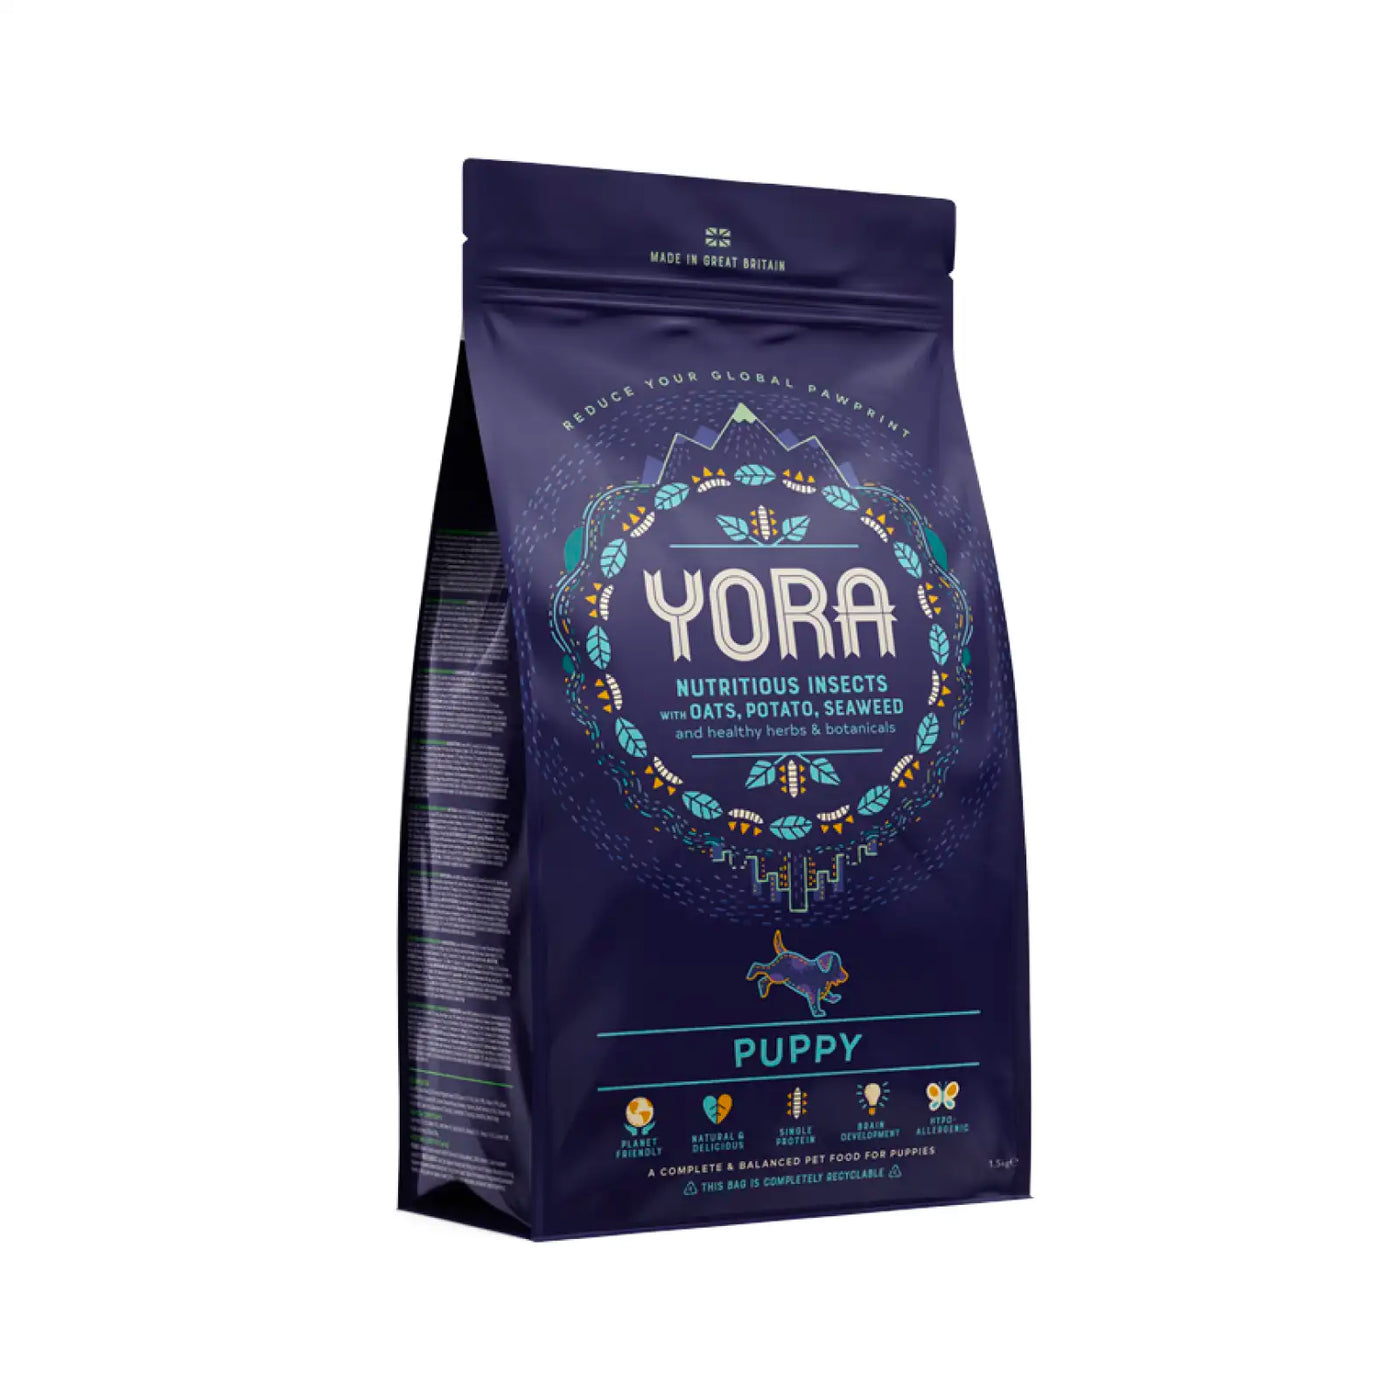 Yora - Complete Insect Based Puppy Food